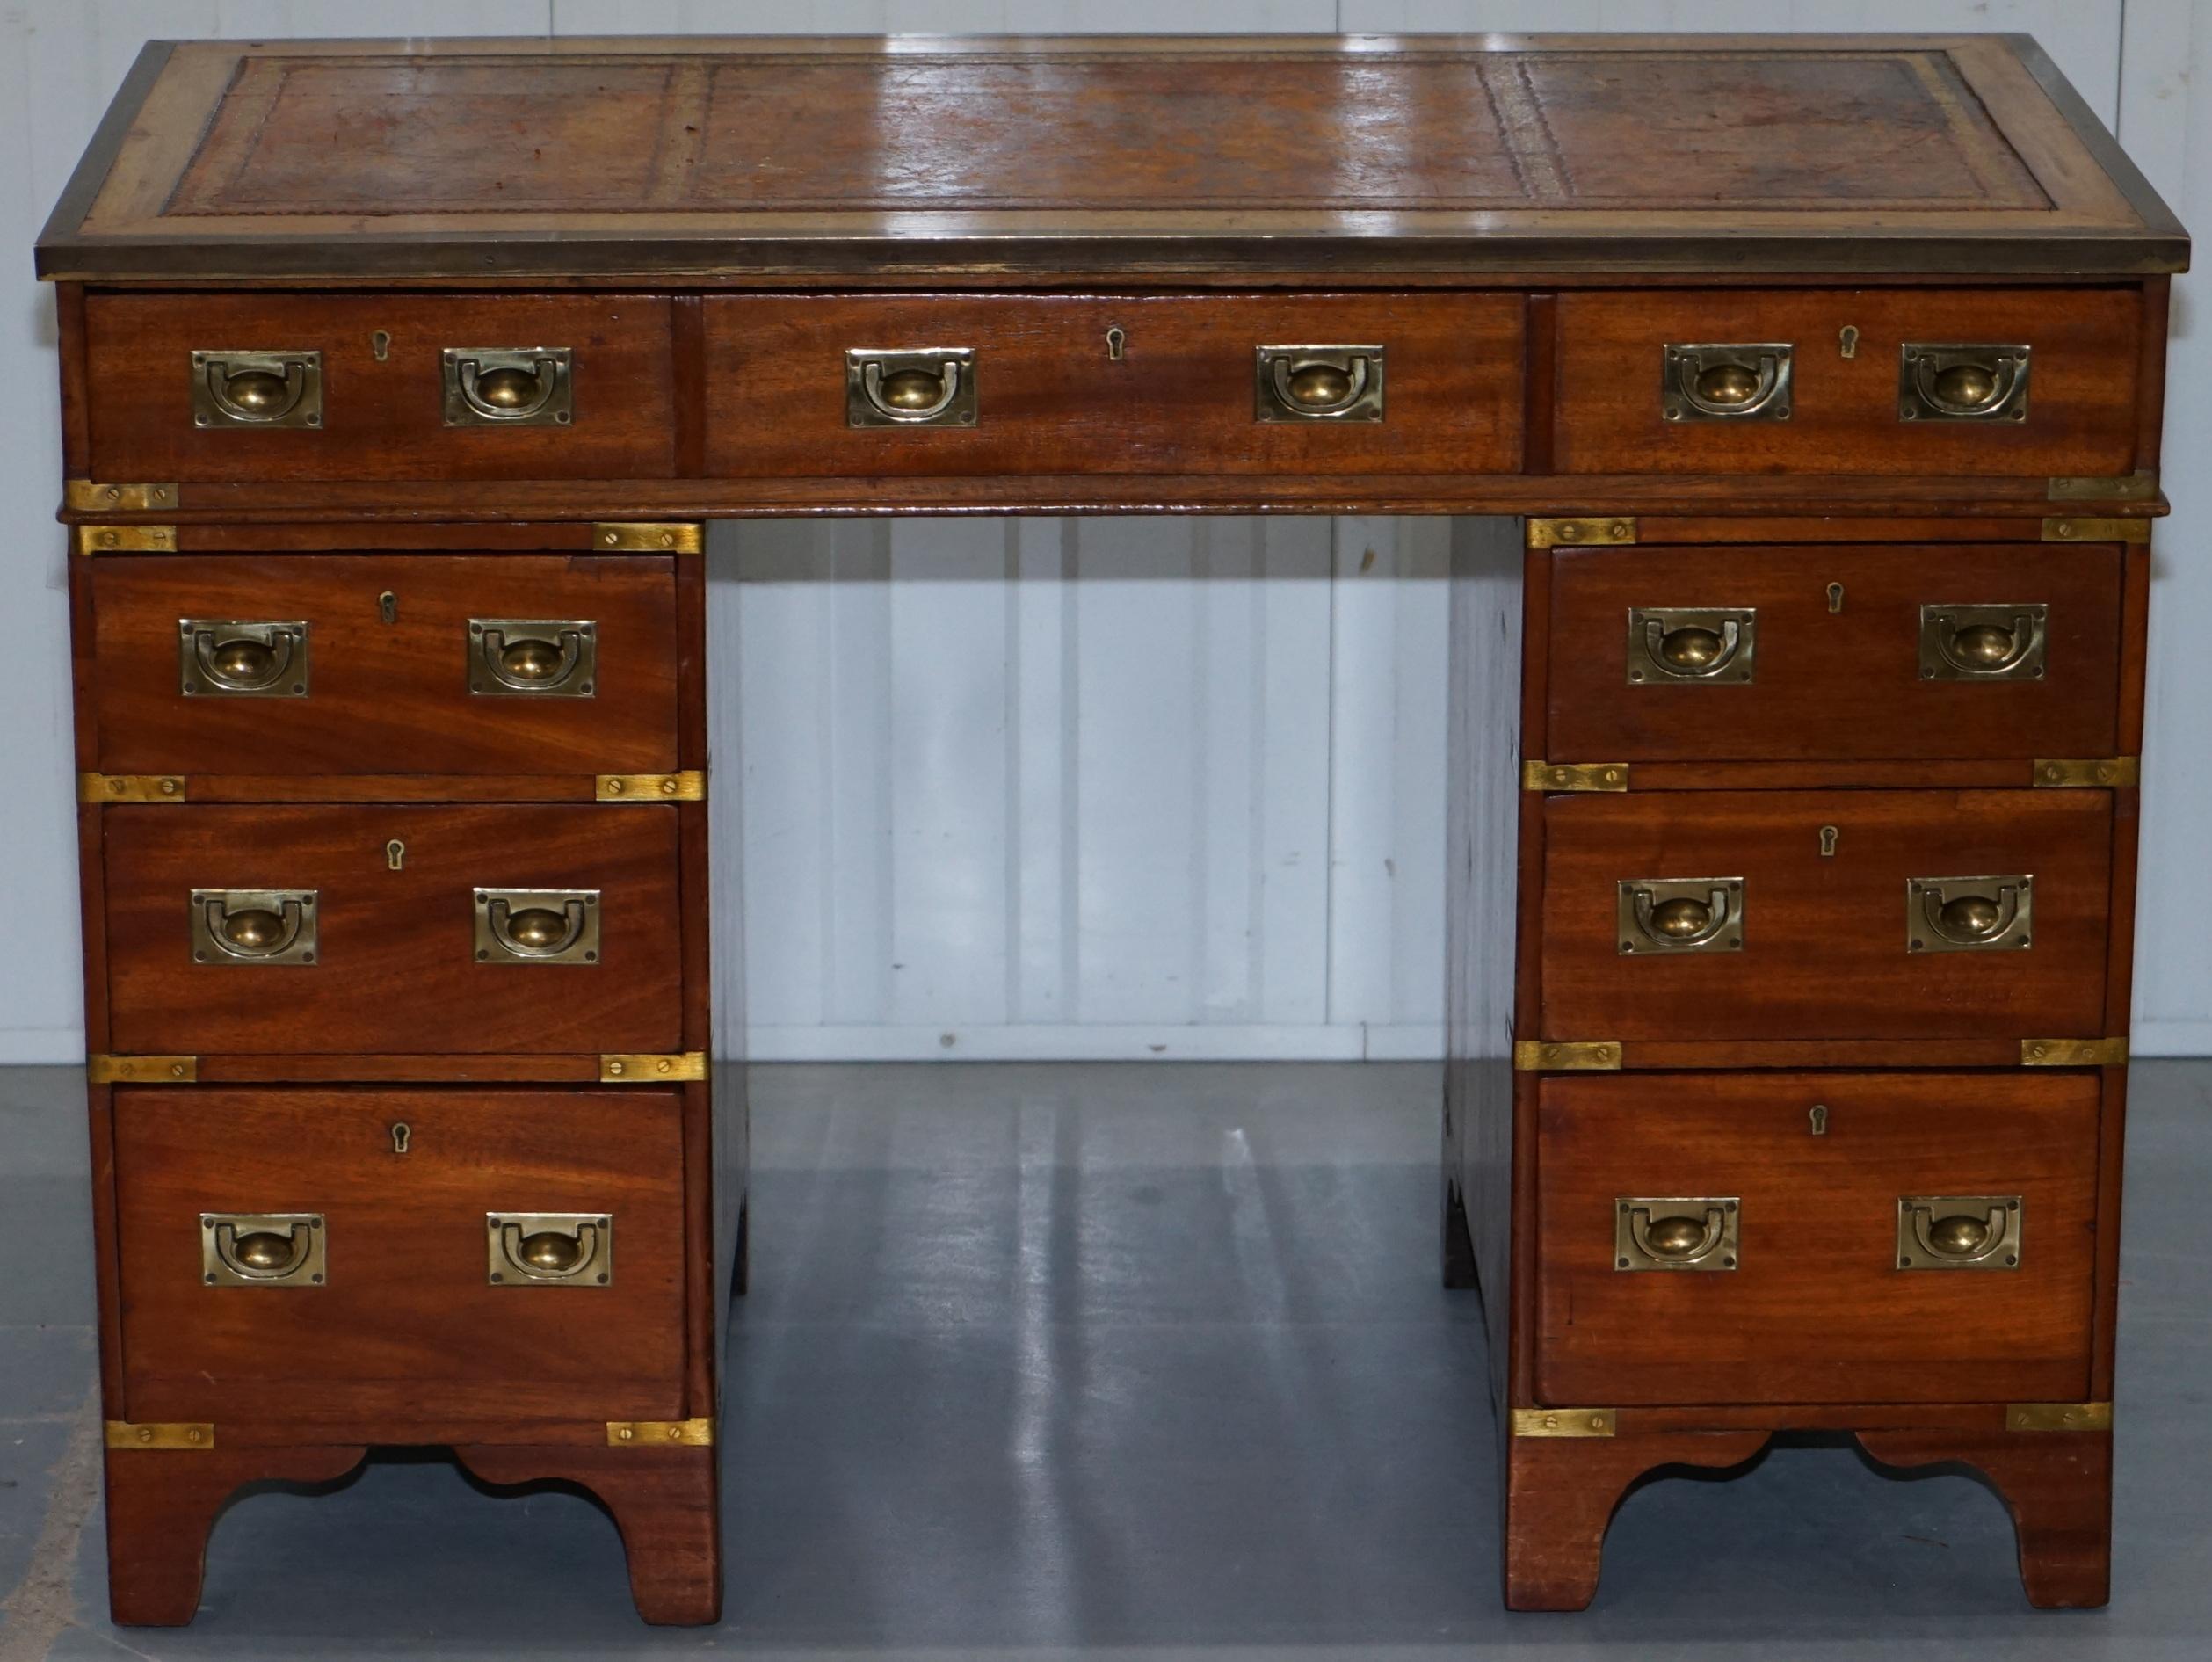 We are delighted to offer for sale this stunning original Military Campaign used Army & Navy twin pedestal partner desk

This desk is very rare, a period used piece, each pedestal has three nicely sized drawers, the desk top has one large map